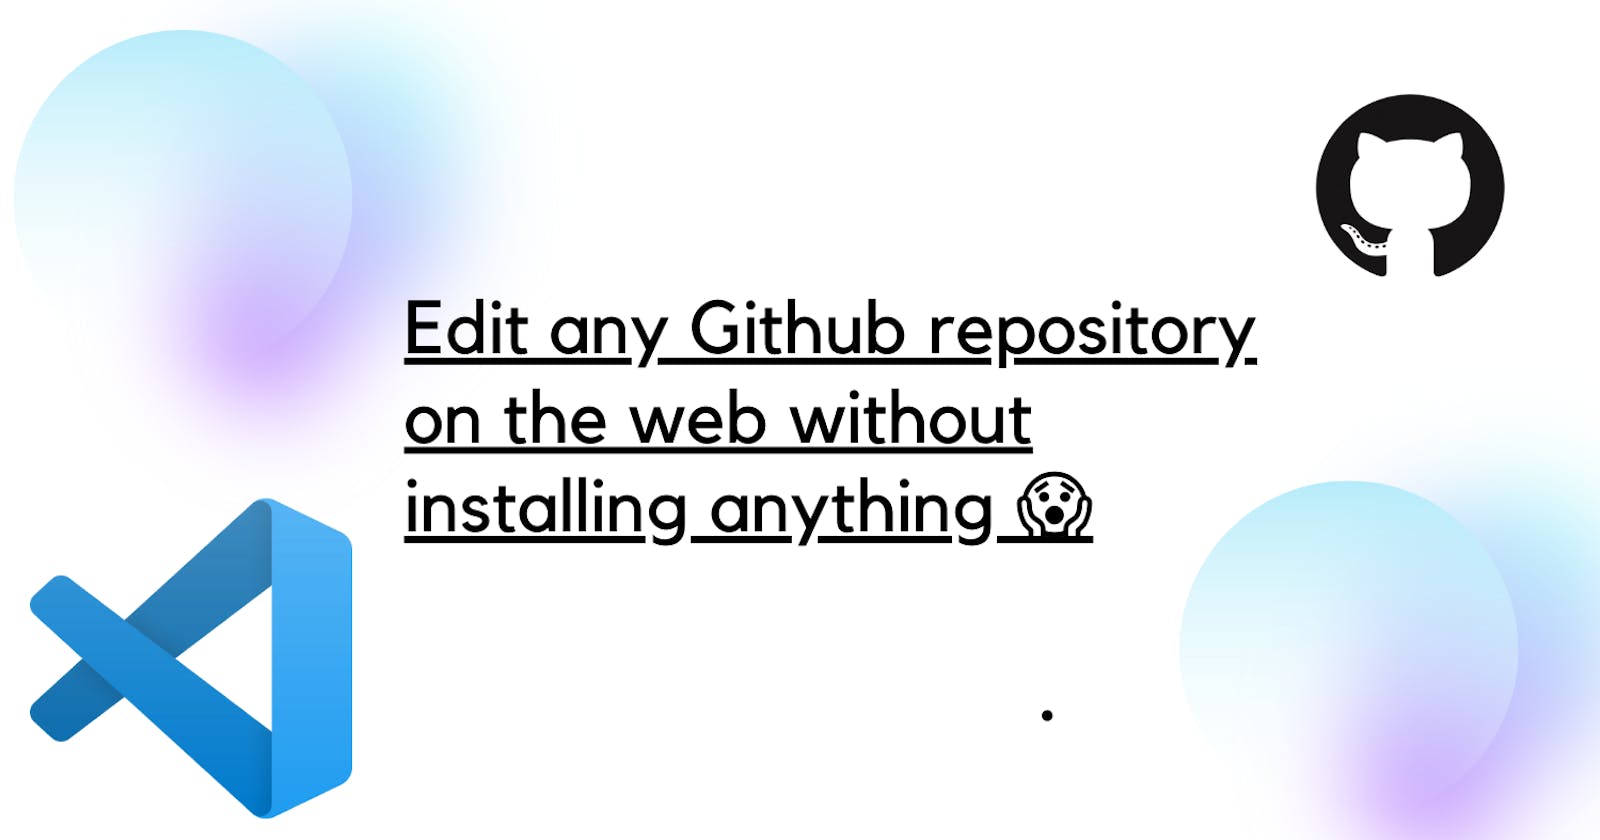 Edit any Github repository on the web without installing anything😱